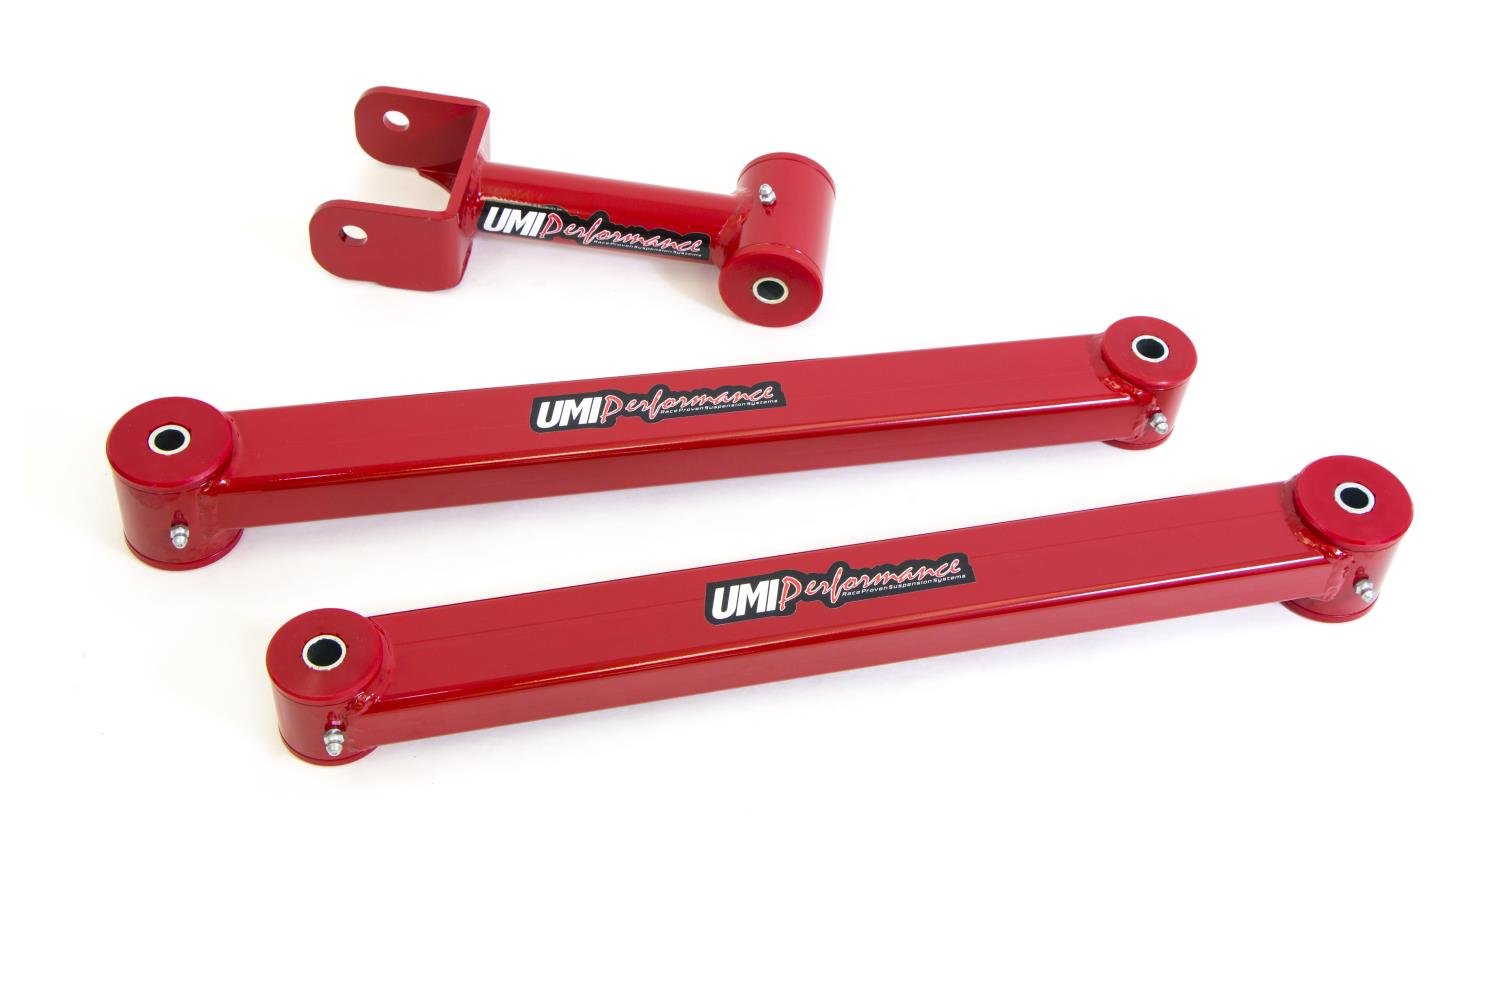 This non-adjustable rear suspension kit from UMI replaces the upper control arm and lower rear contr